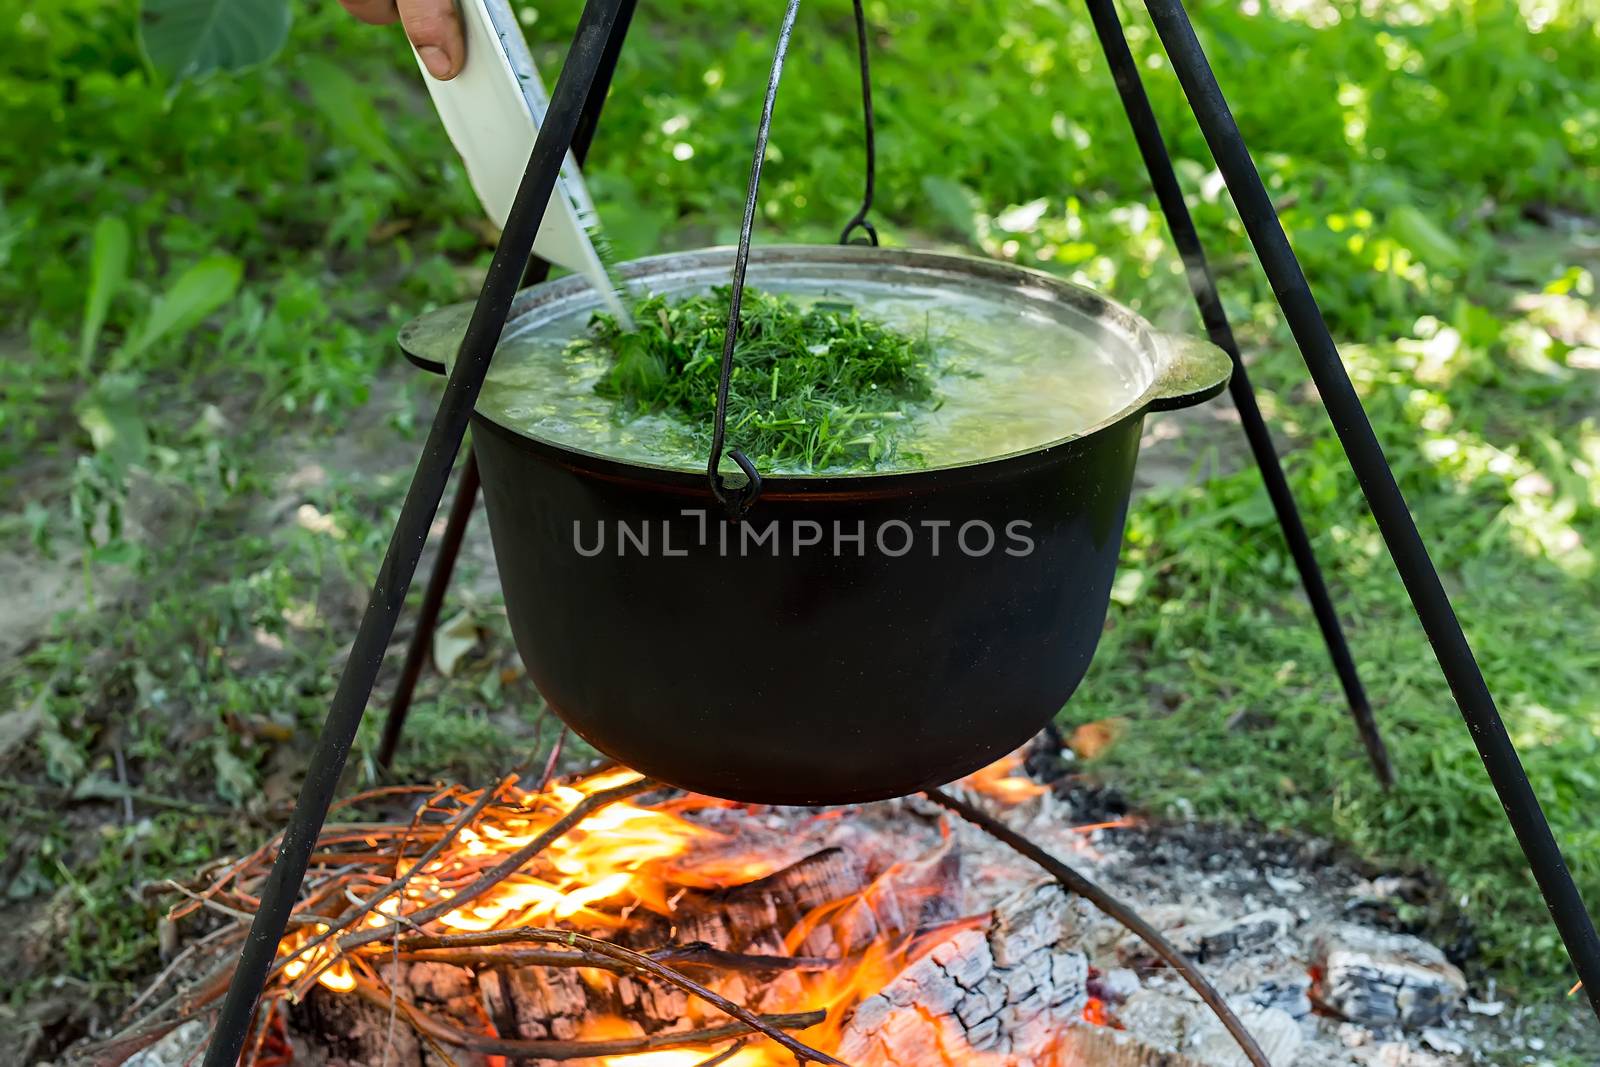 Man pours dill from the plate into the pot, which is heated on a fire. Fresh fish soup.